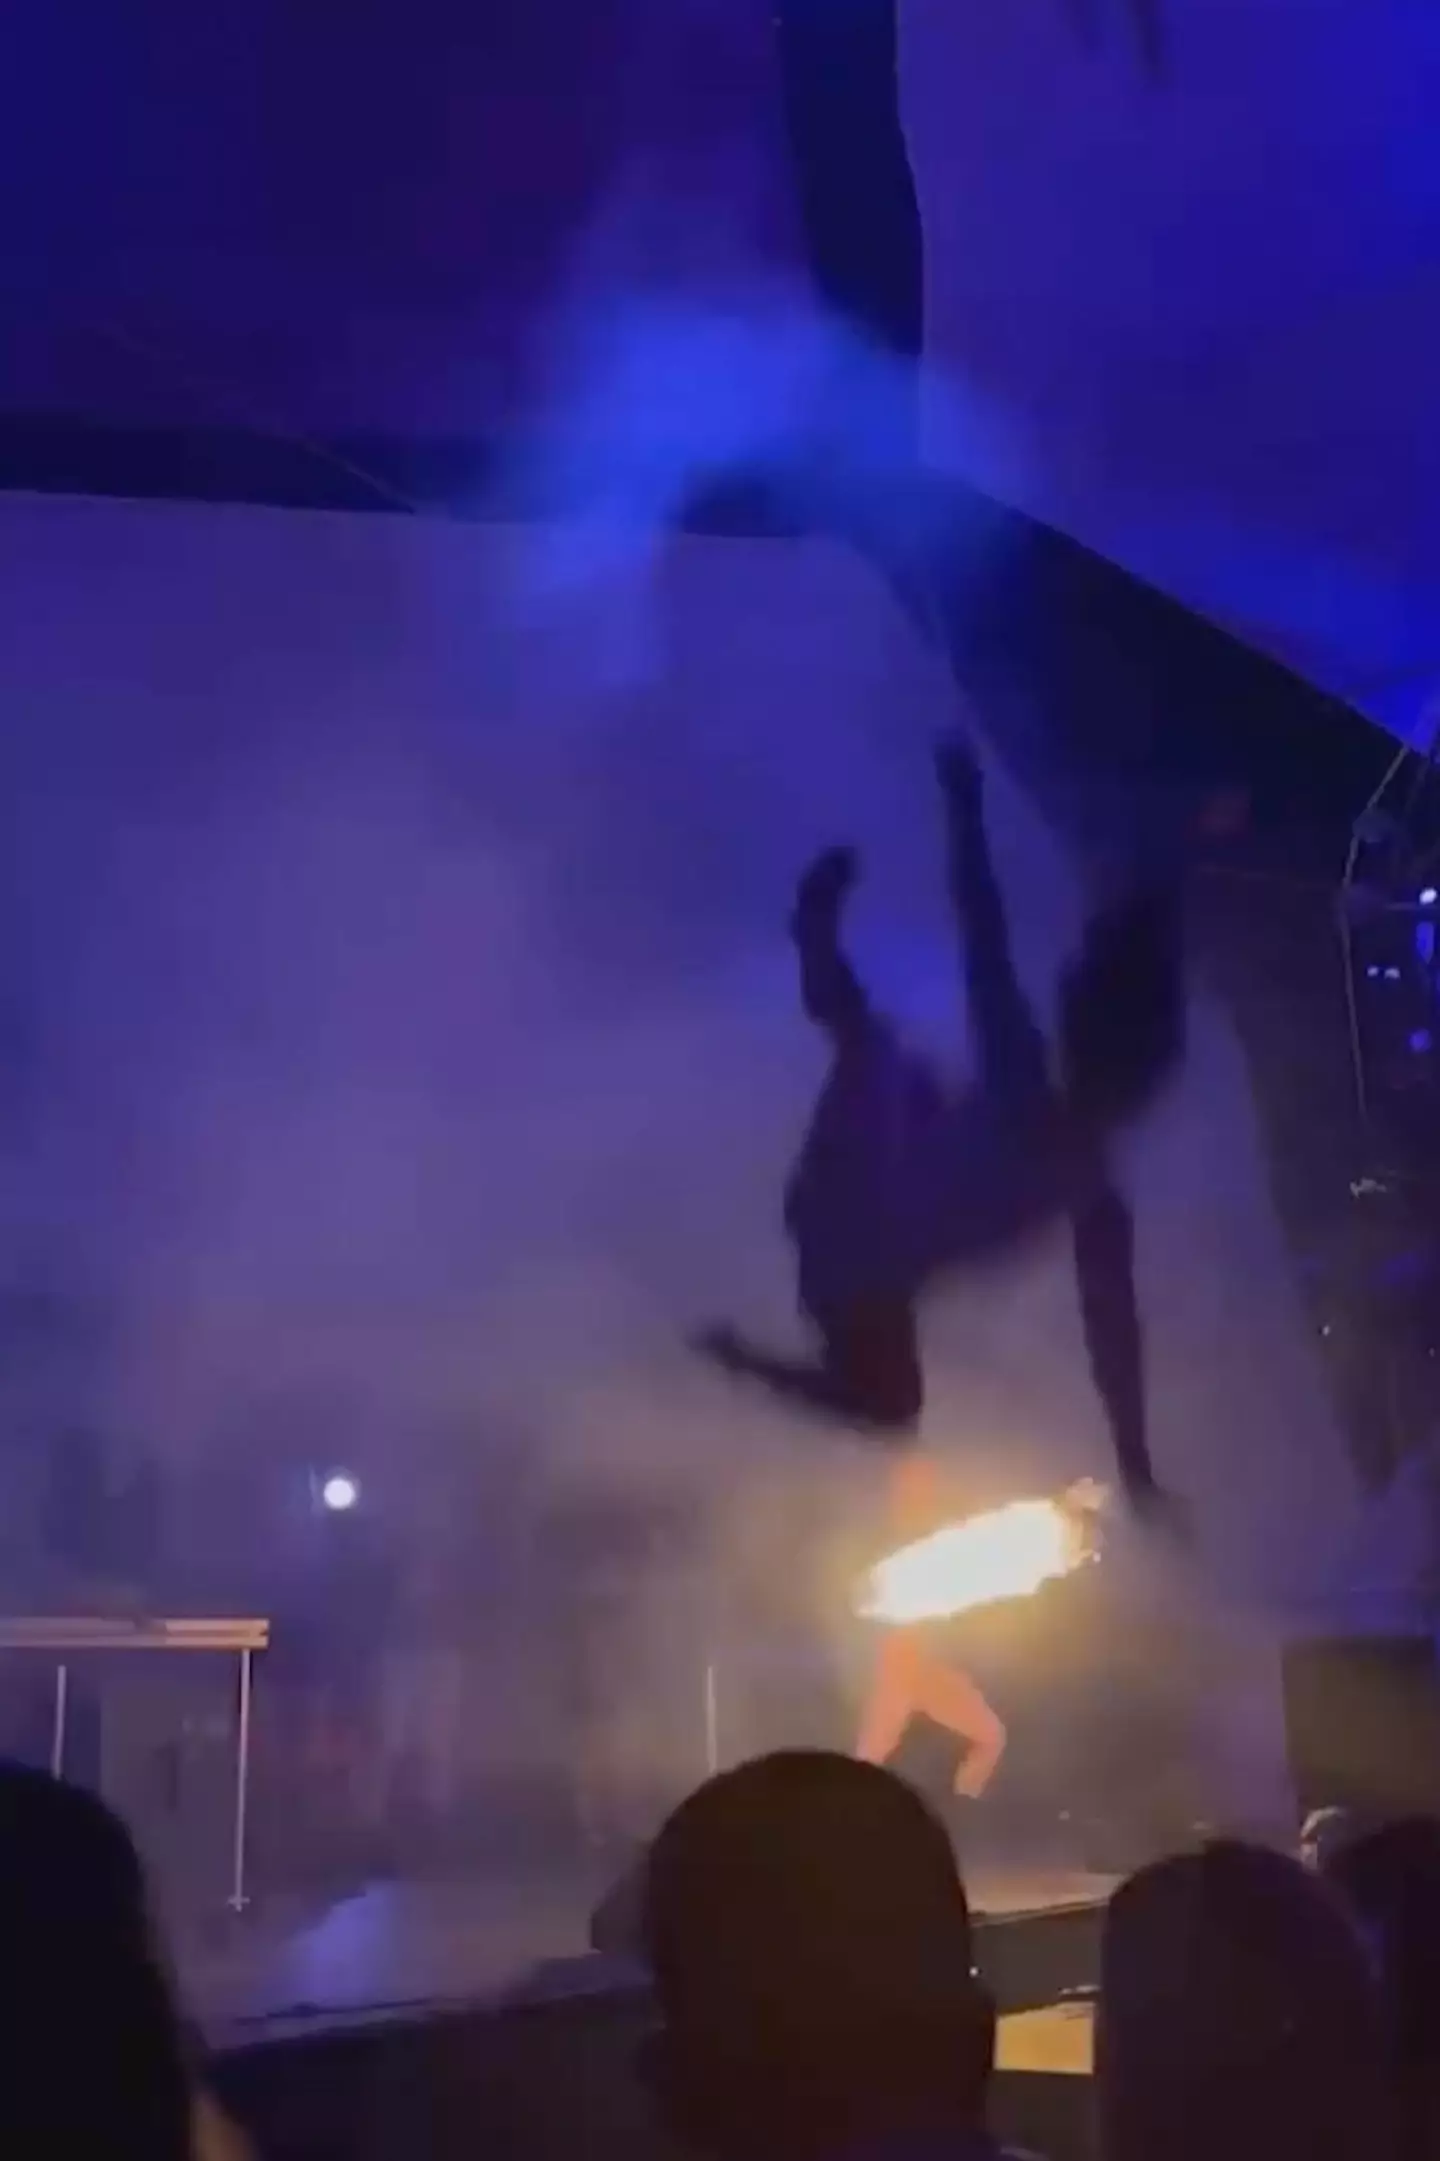 A Coachella dancer fell from a height during a performance over the weekend.